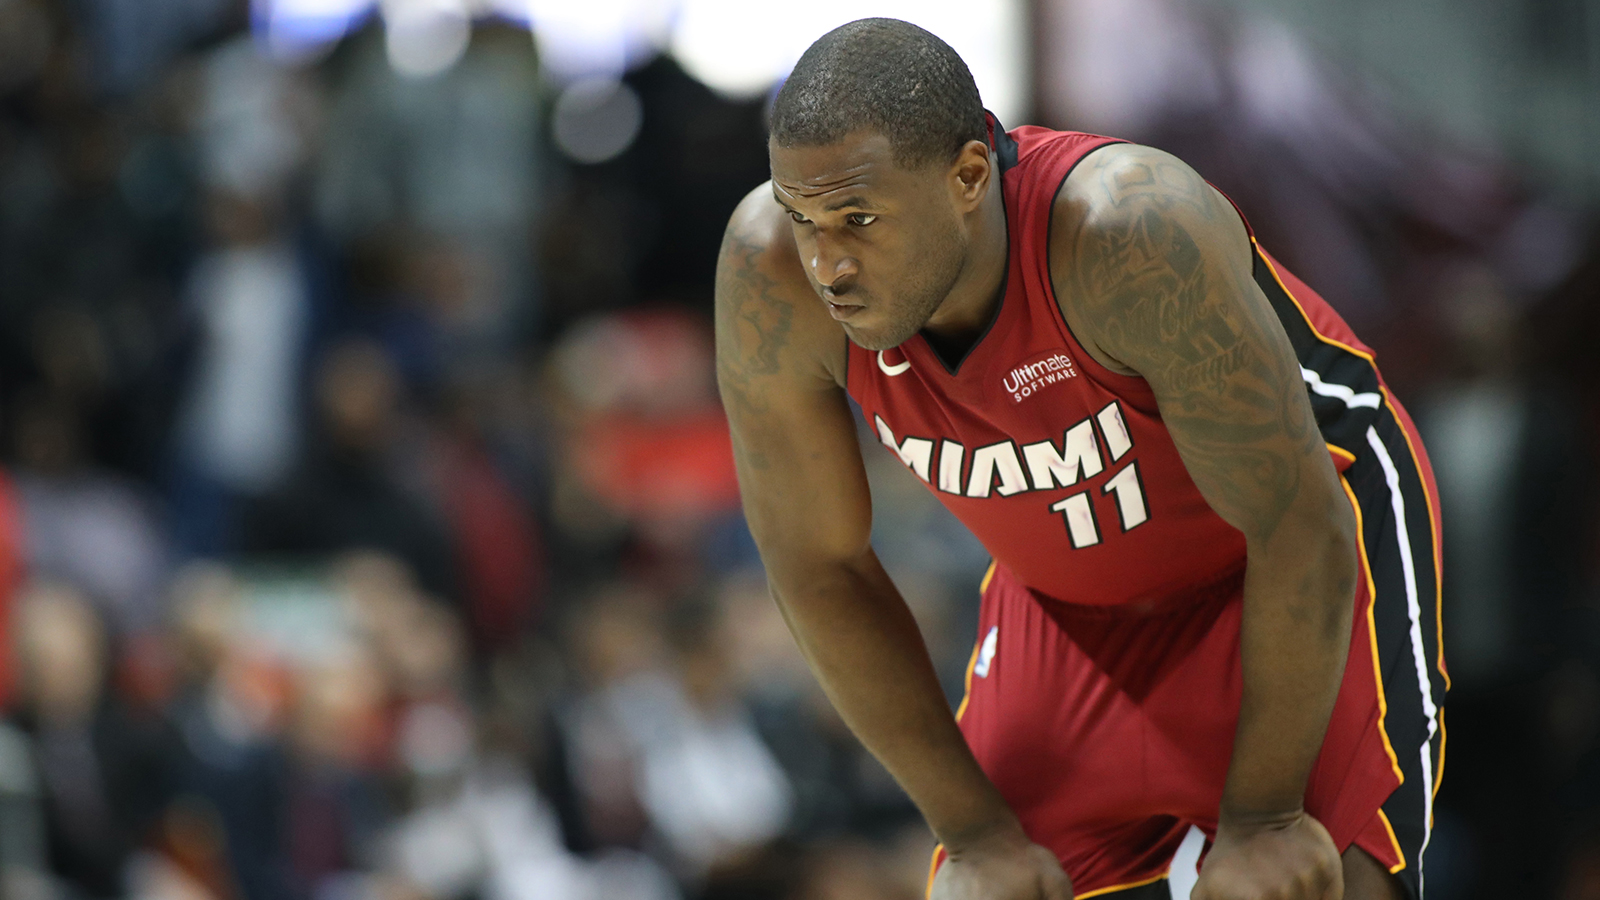 Heat guard Dion Waiters to consider ankle surgery in offseason